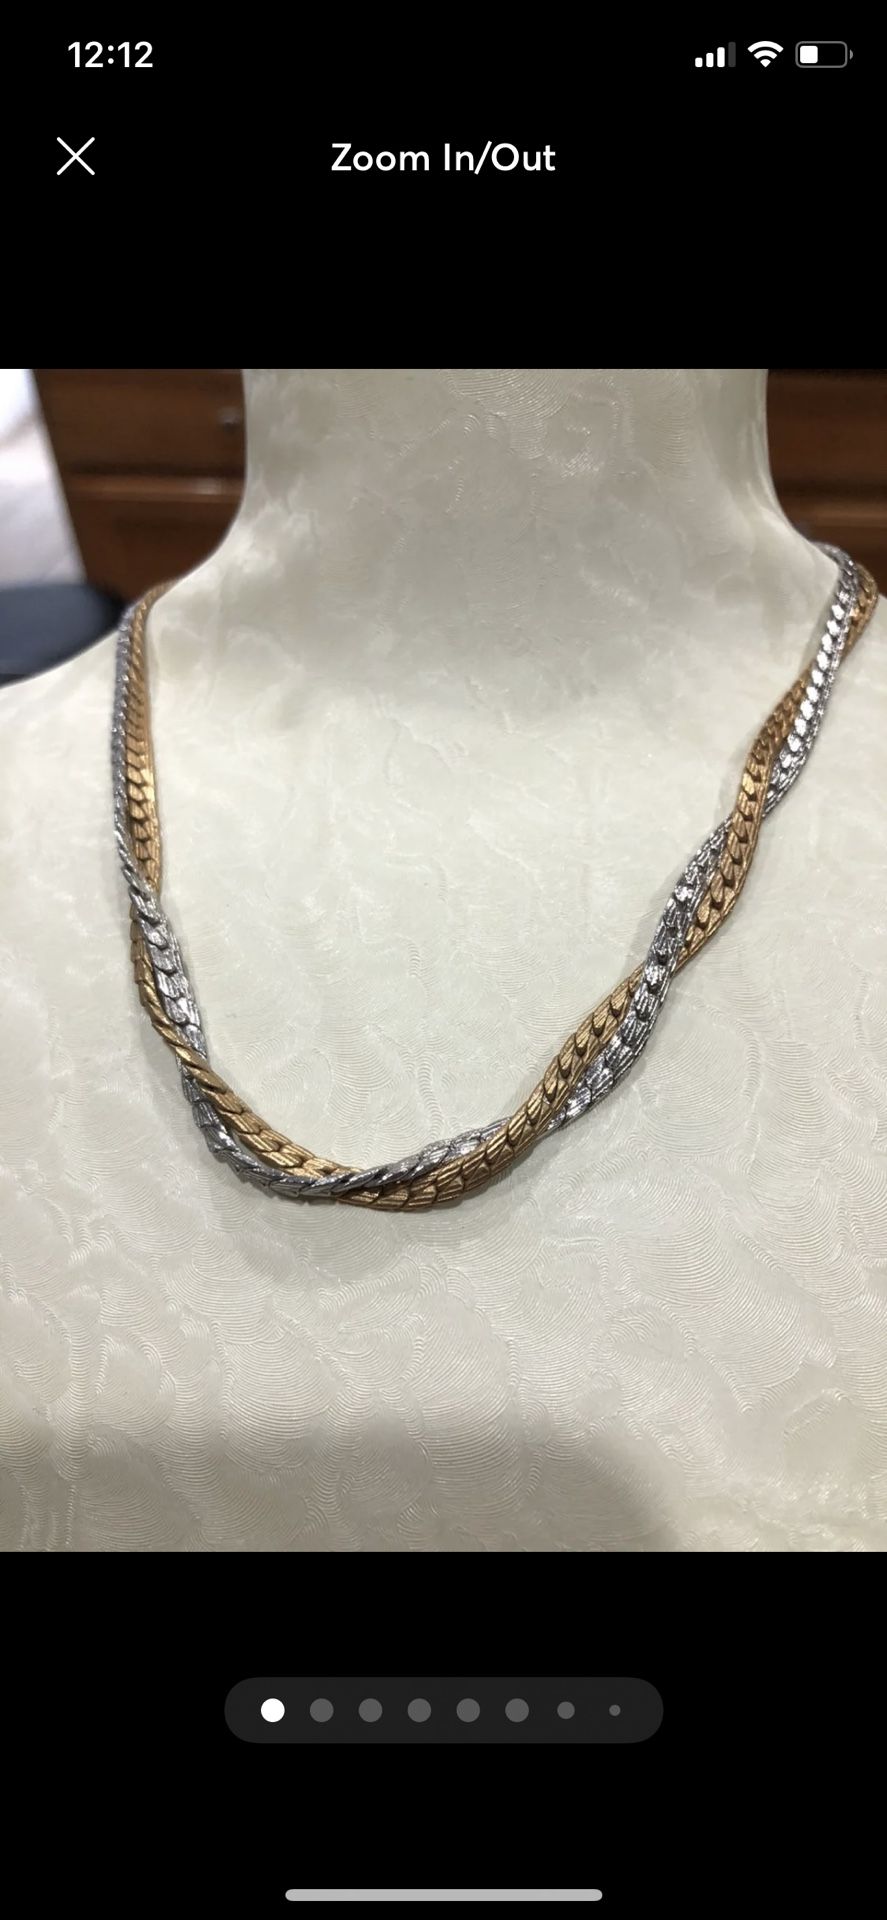 Vintage Signed Avon Two Tone Twisted/Braided 15” Chain Choker Necklace, New Never Been Used